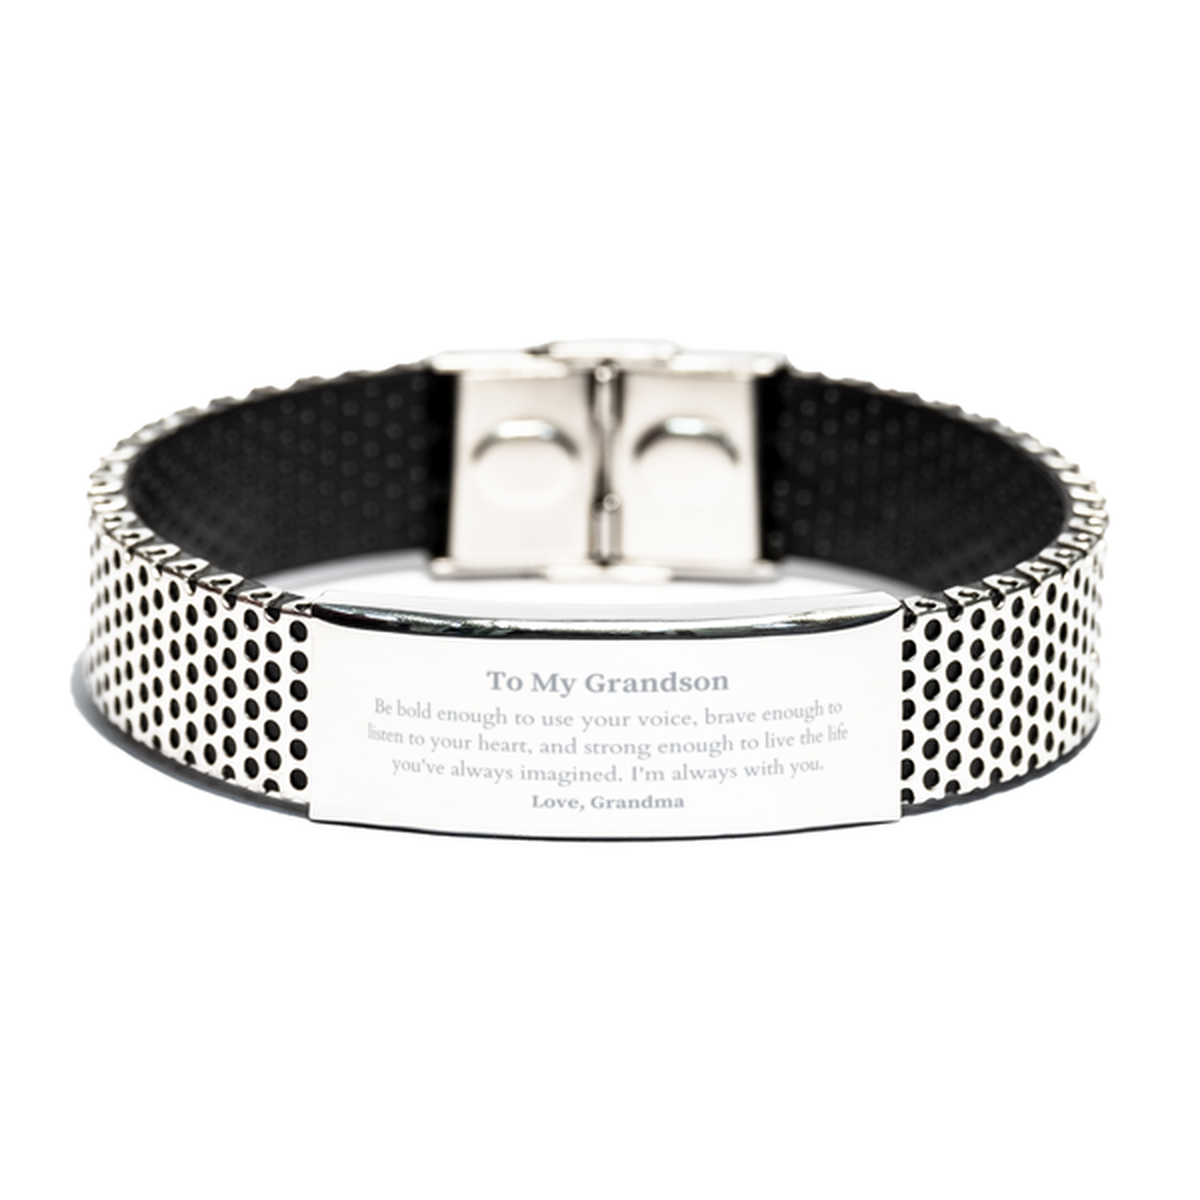 Keepsake Grandson Stainless Steel Bracelet Gift Idea Graduation Christmas Birthday Grandson from Grandma, Grandson Be bold enough to use your voice, brave enough to listen to your heart. Love, Grandma